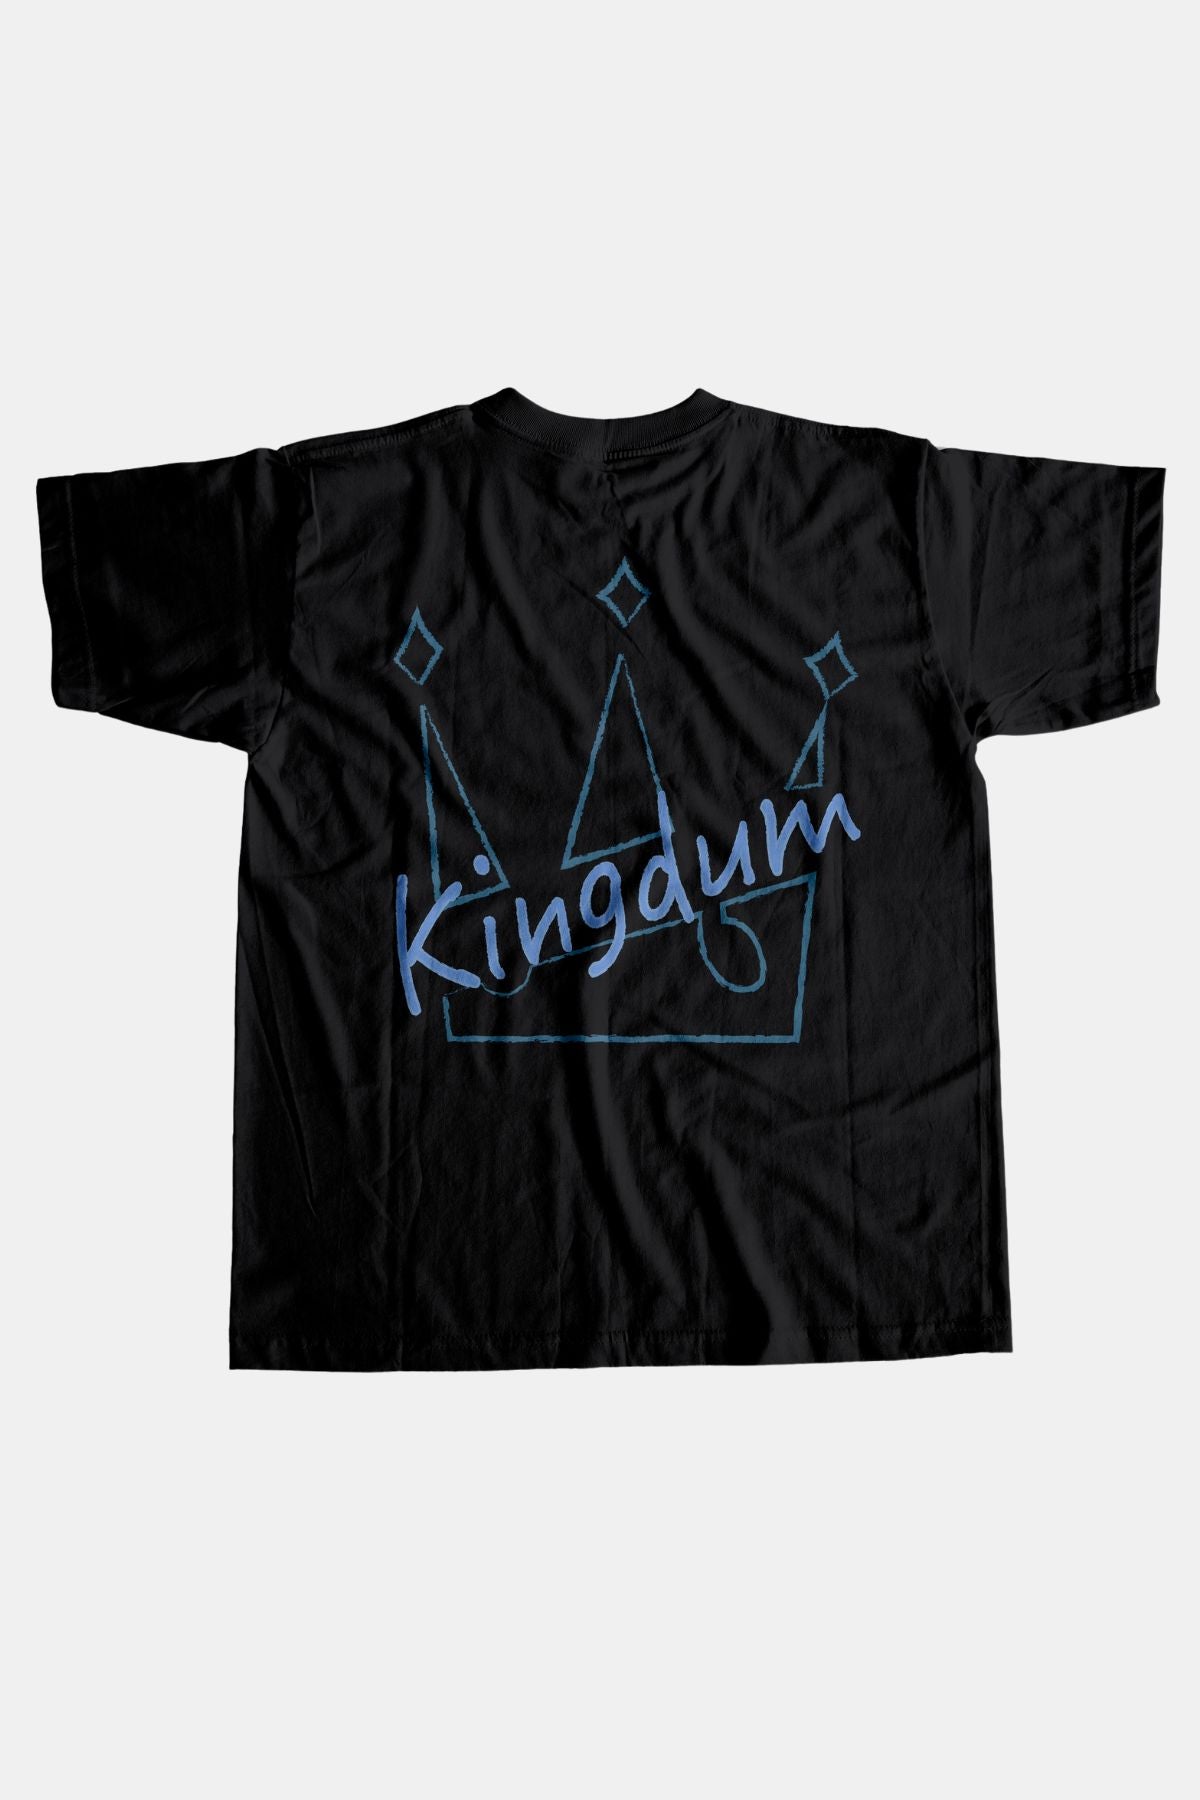 Sketched Out Crown T-shirt (Black)